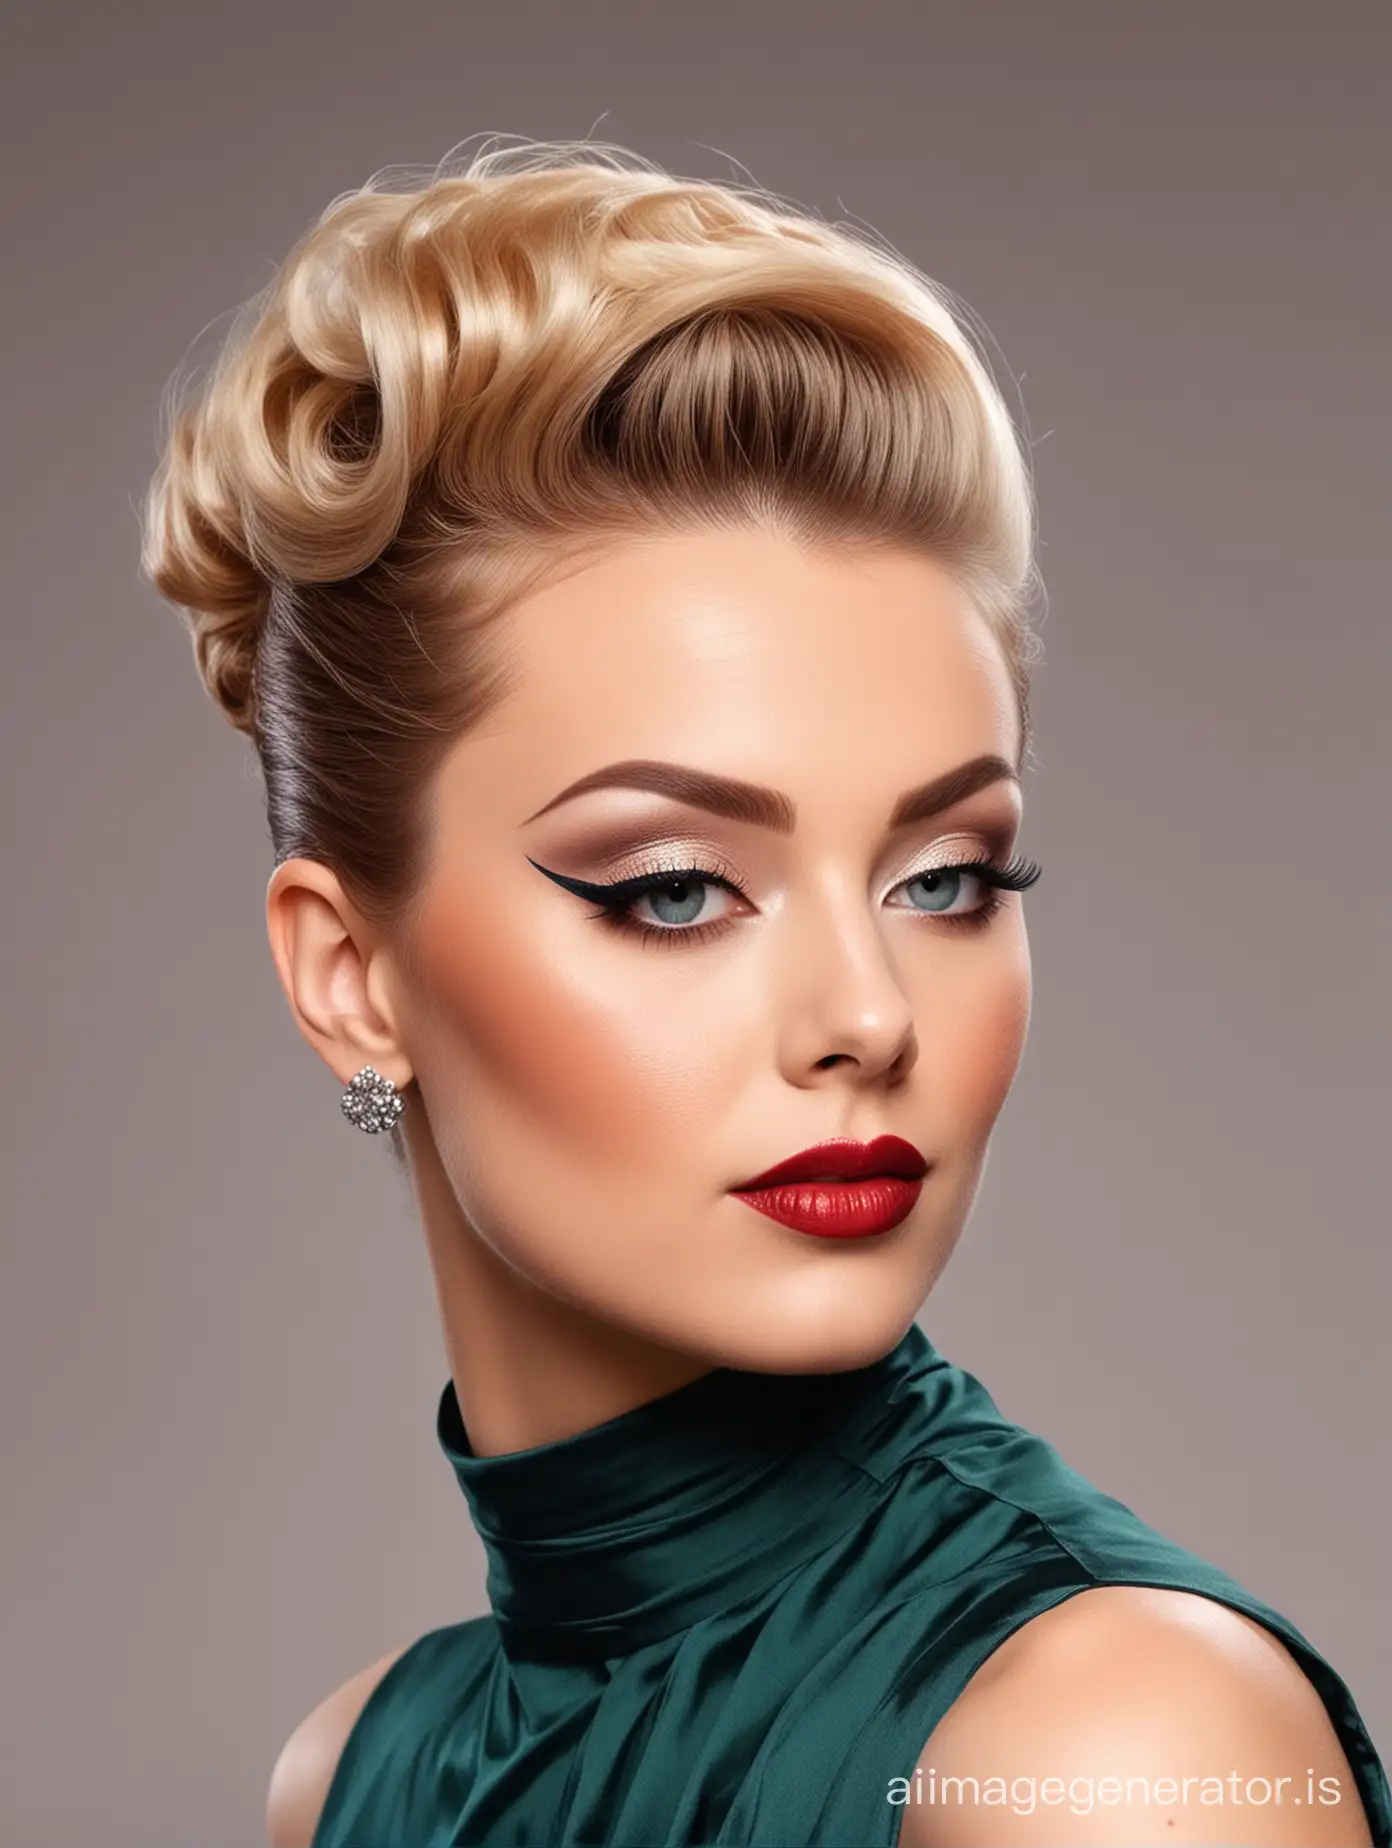 make-up in the style of jazz of the 40s,in the style of Jazz,Dresses in the style of jazz,professional haircuts in the style of jazz,professional styling in the style of jazz,background in the style of jazz